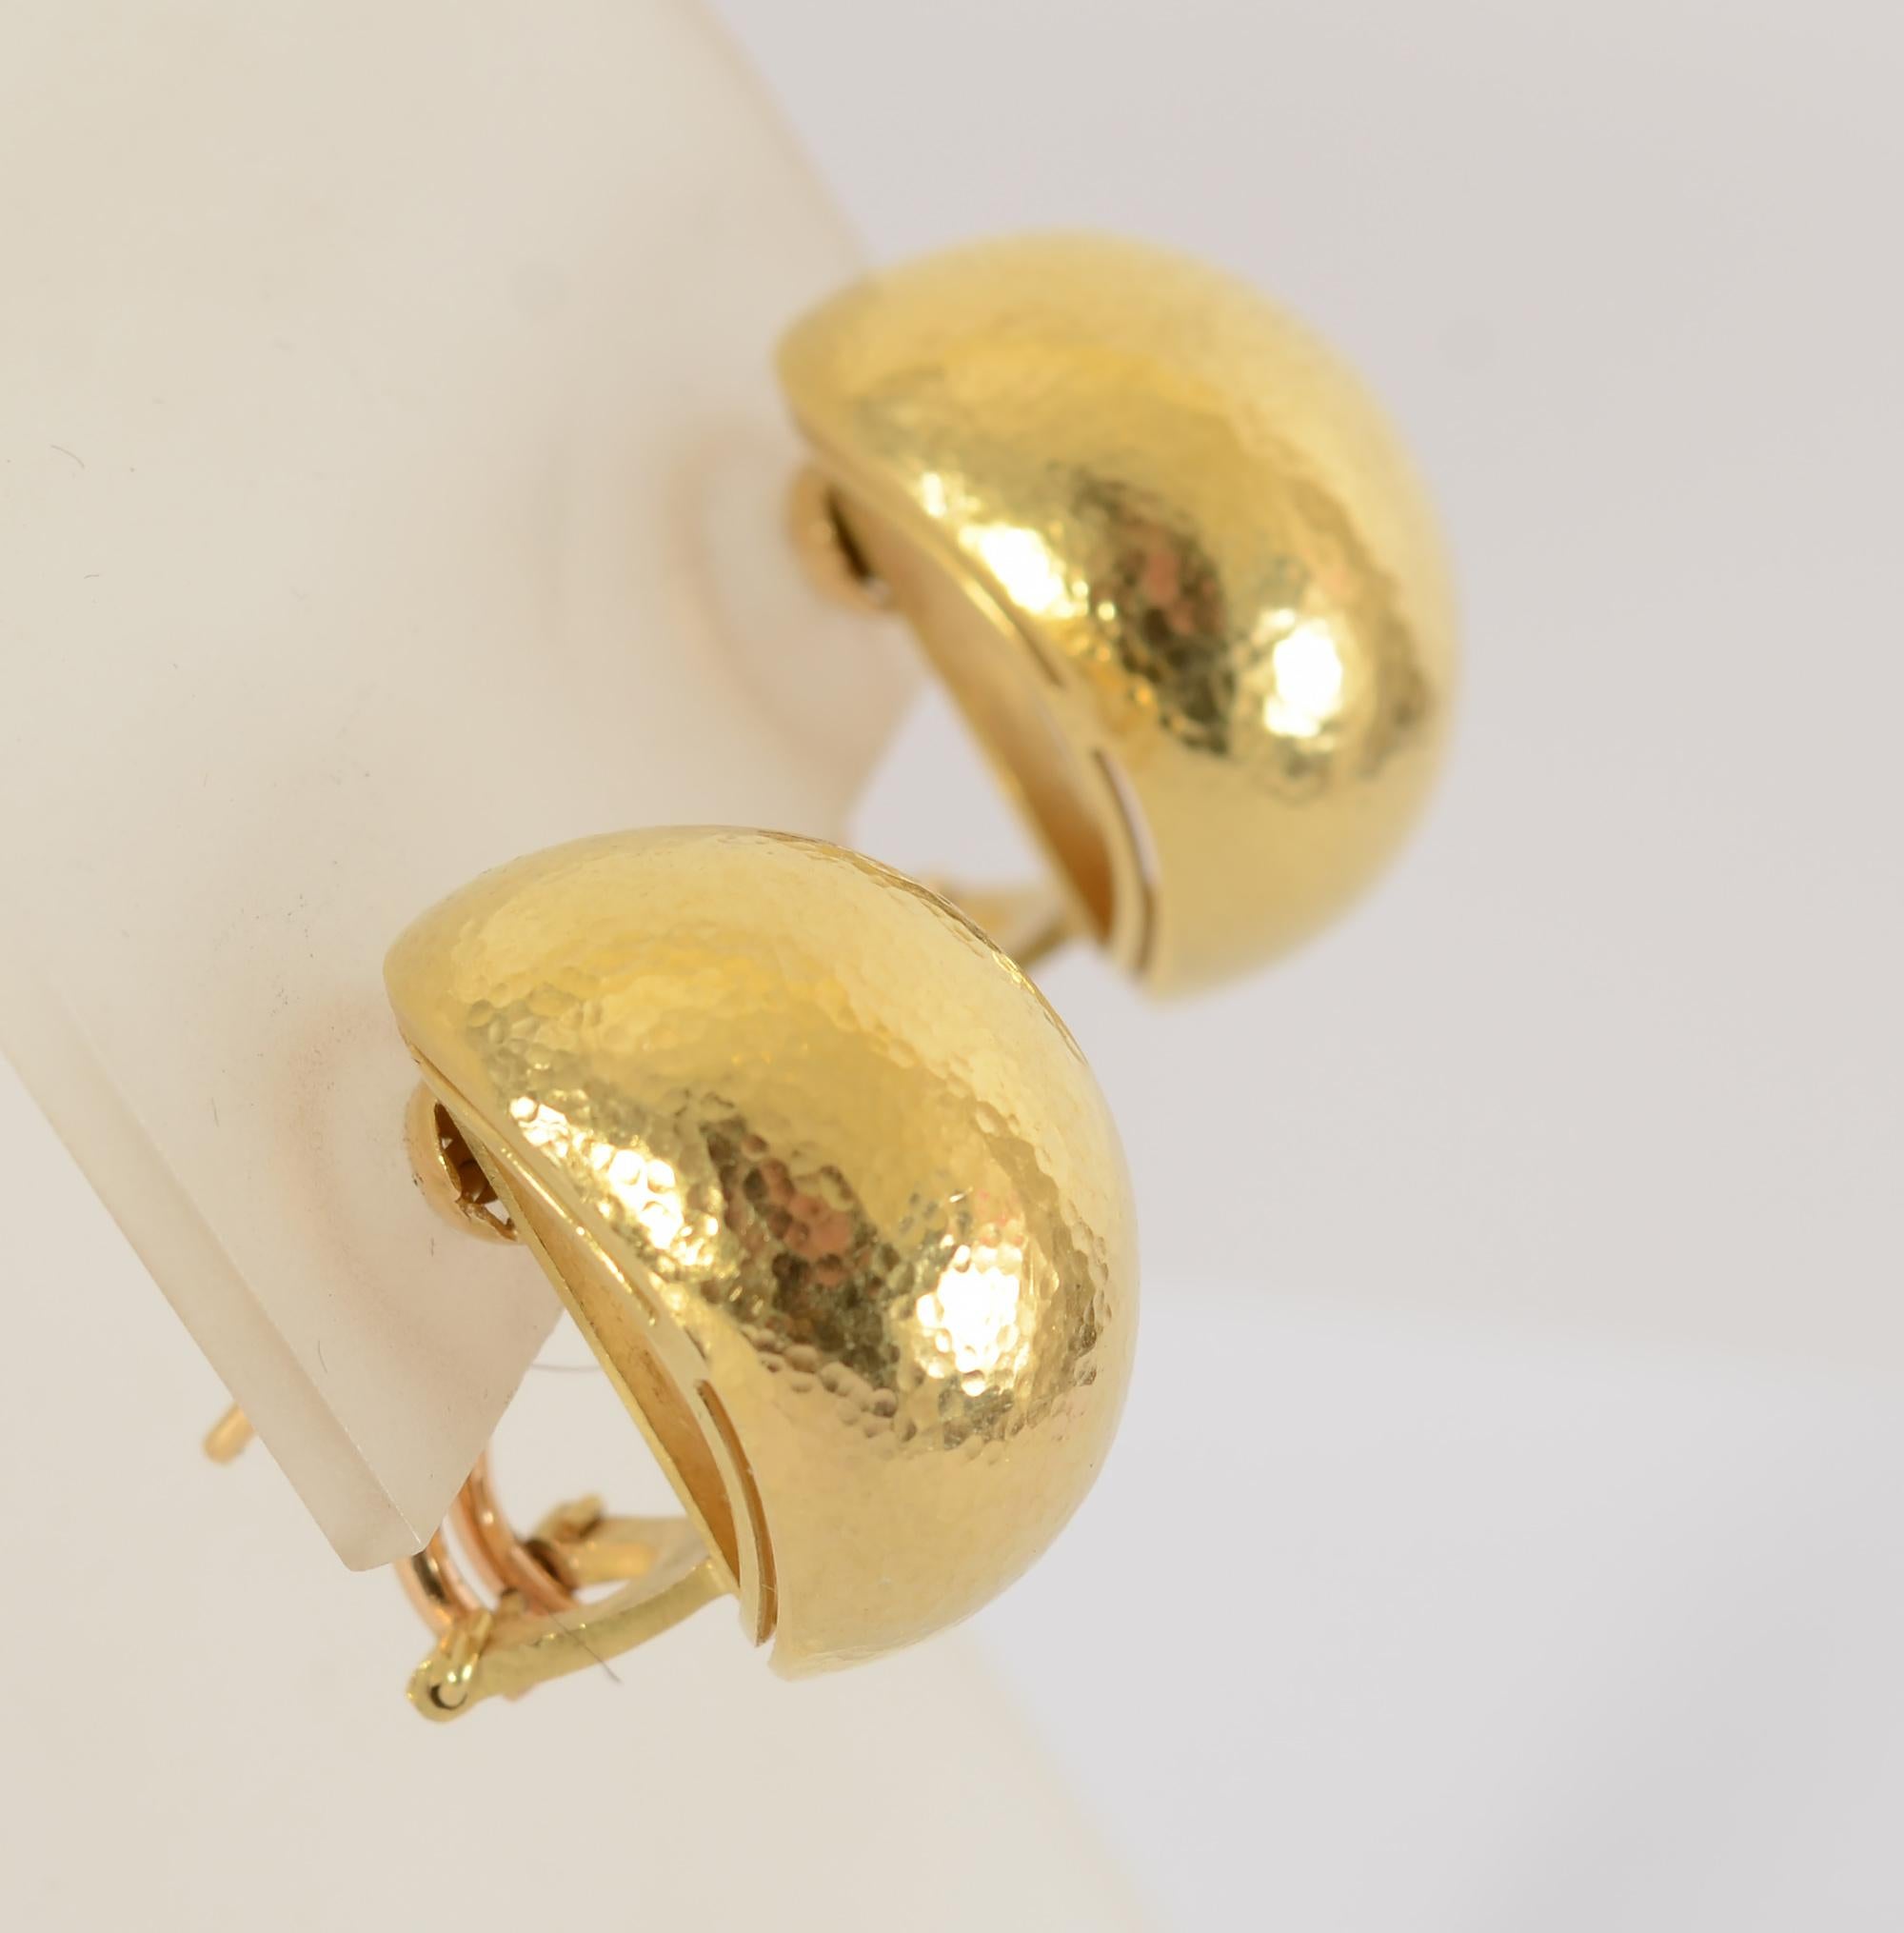 Elizabeth Locke hammered gold shrimp earrings with a bulbous shape. An opening along the length of each side adds a bit of decoration to these earrings that are perfect for dress or casual.
The backs are clips with collapsible posts. The earrings